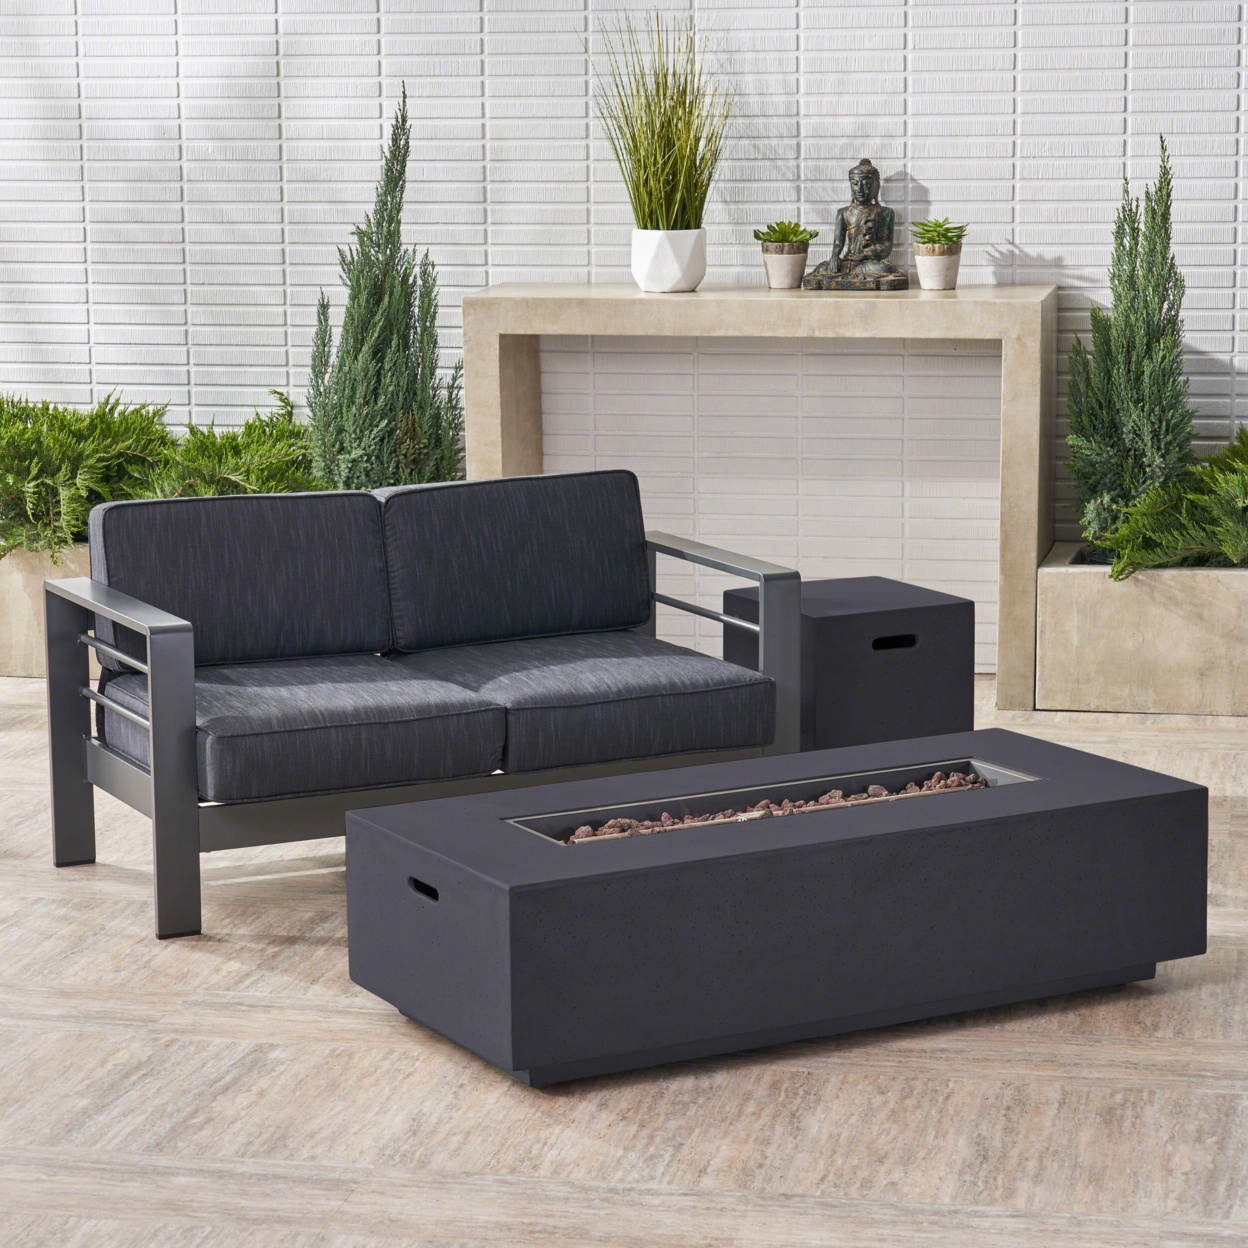 Danae Coral Outdoor Loveseat And Fire Pit Set - Dark Grey